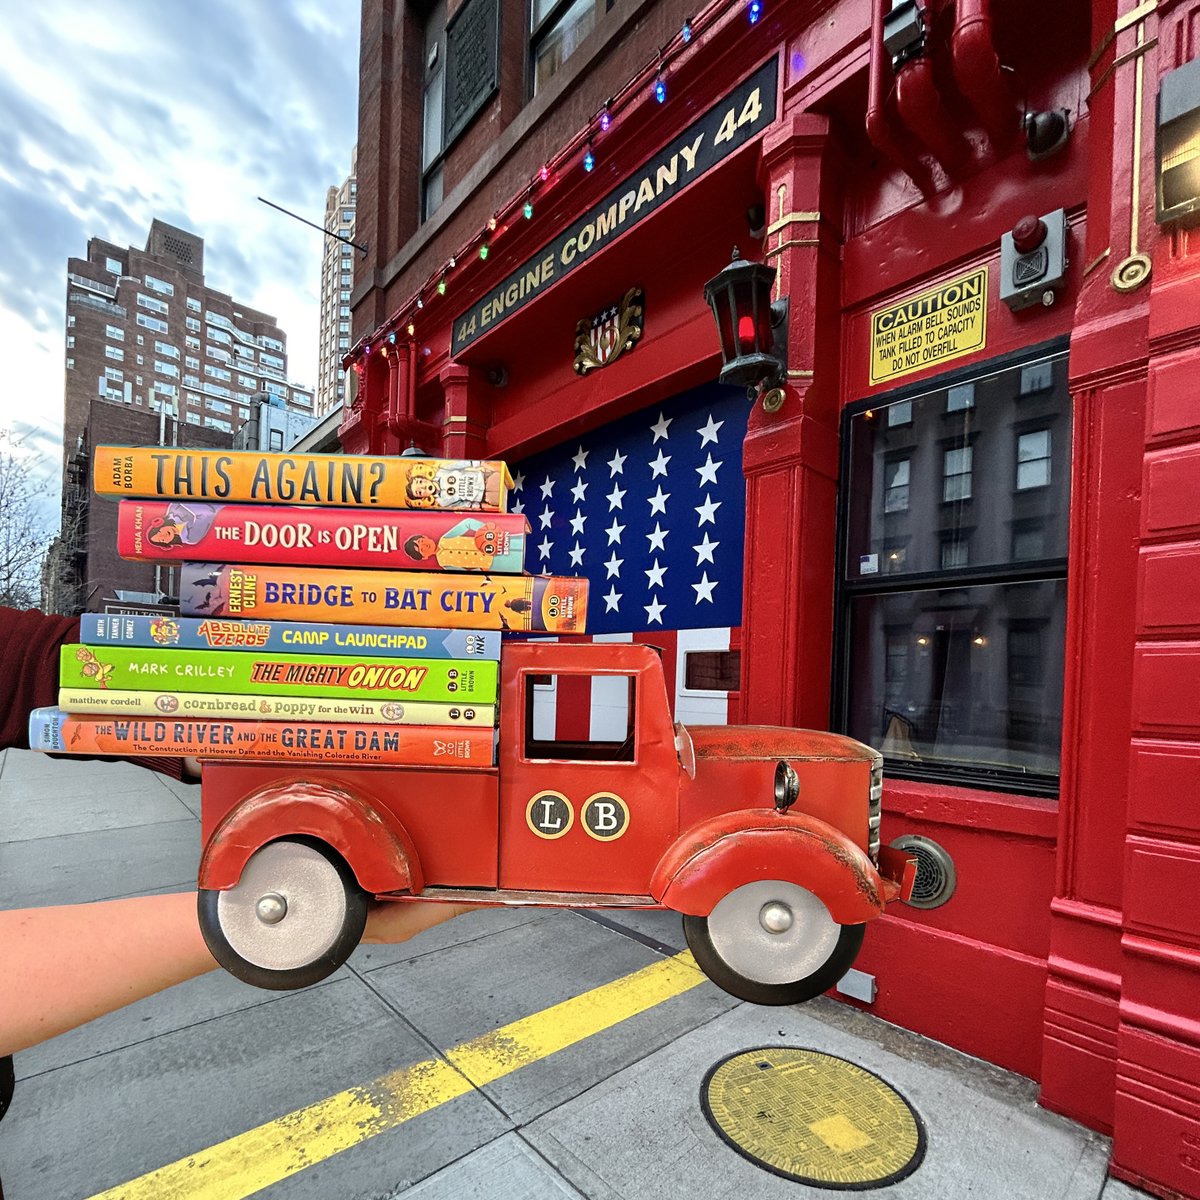 #GIVEAWAY 🛻📚 The LBYR book truck was on a drive through the neighborhood when we came across this striking fire station! Do you know where we are? Head over to IG to comment your guess for a chance to win a book of your choice off the back of the truck: instagram.com/p/C6Mm2xiAbkY/